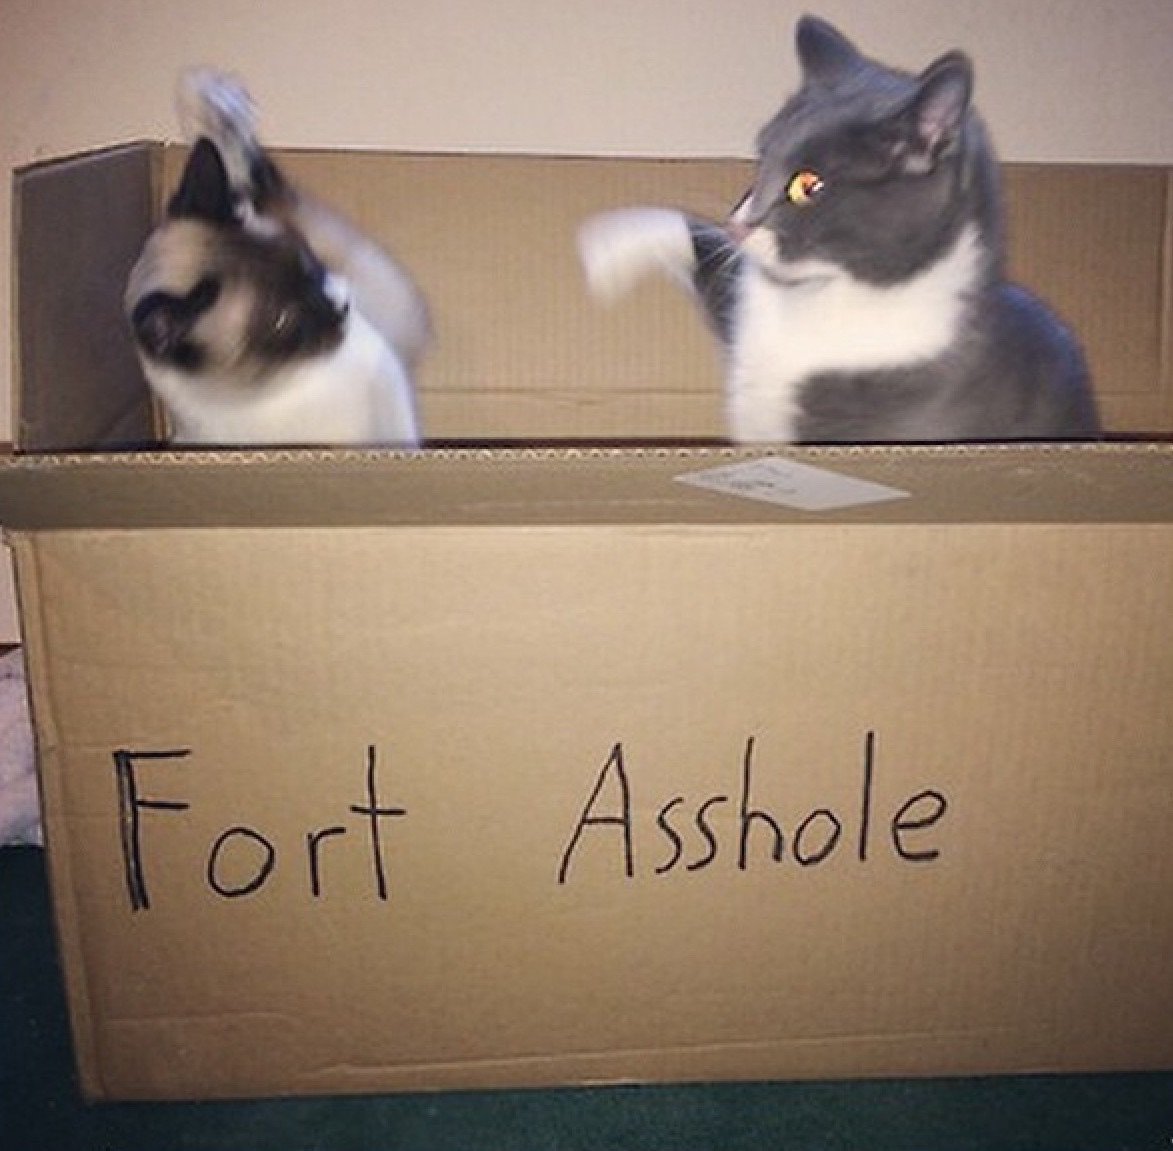 Nothing like a cat fight in Fort Asshole.